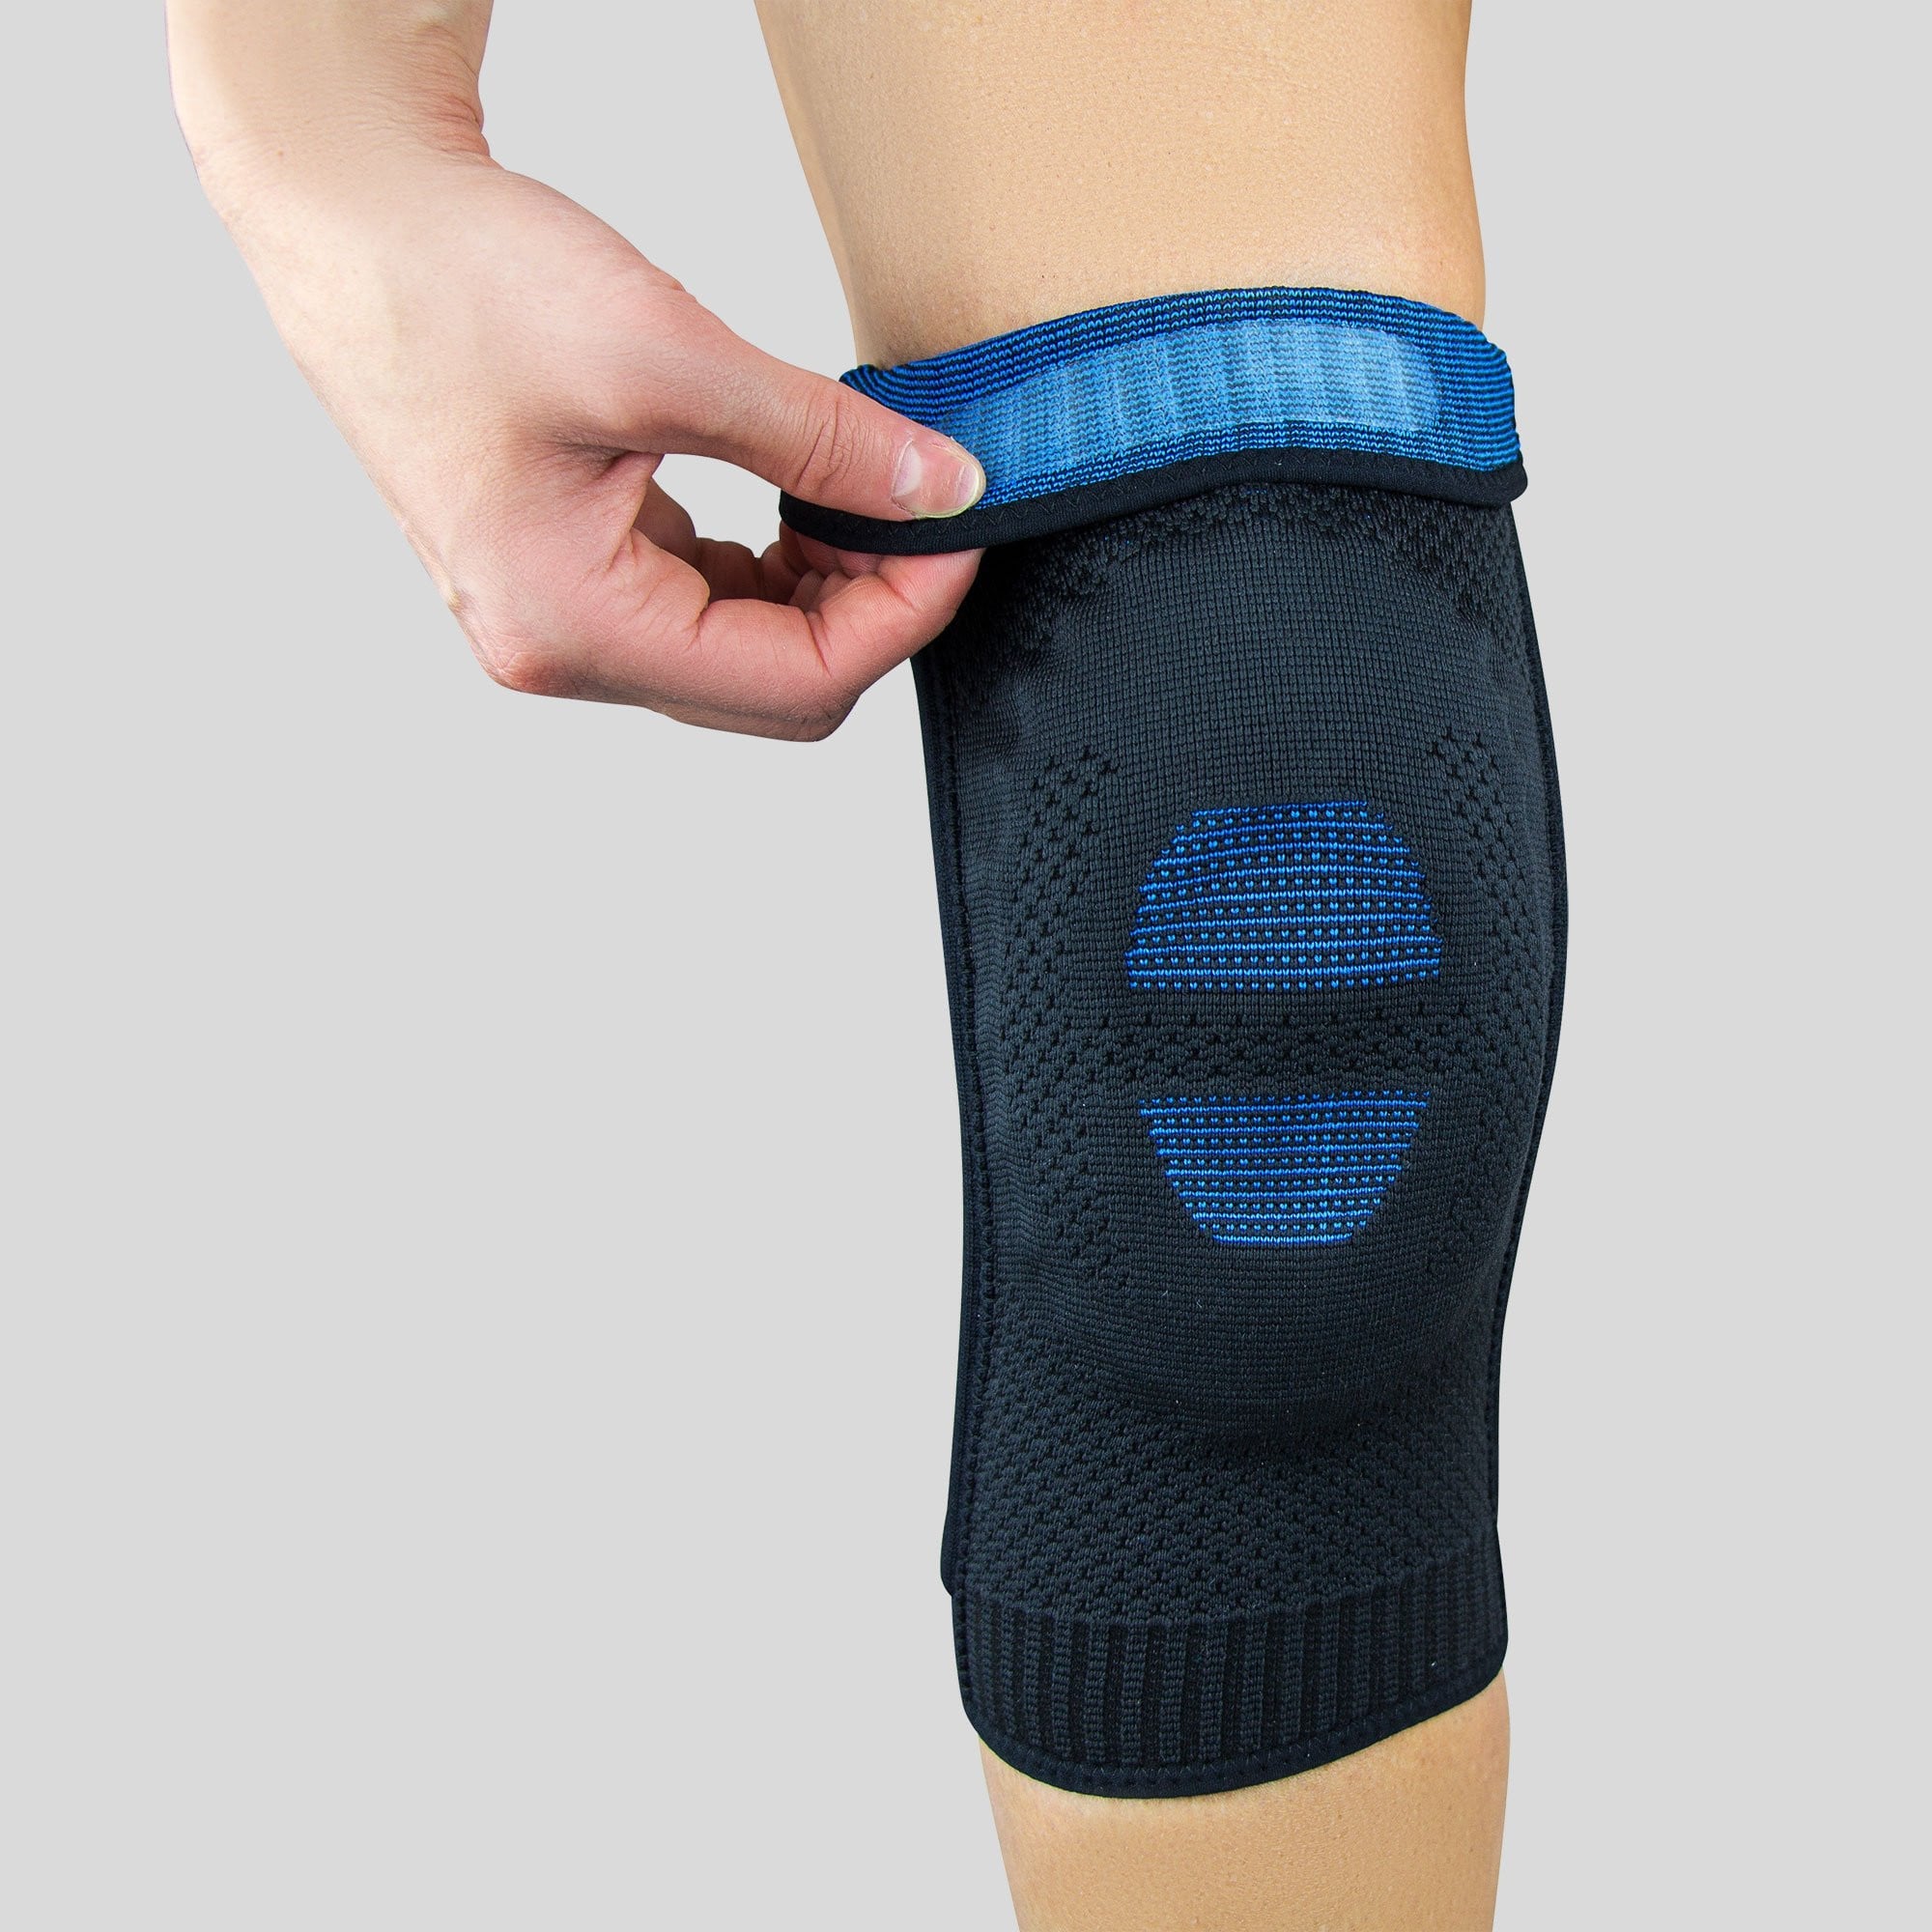 Zensah Compression Leg Sleeves, Blue, X-Small/Small, Braces & Supports -   Canada